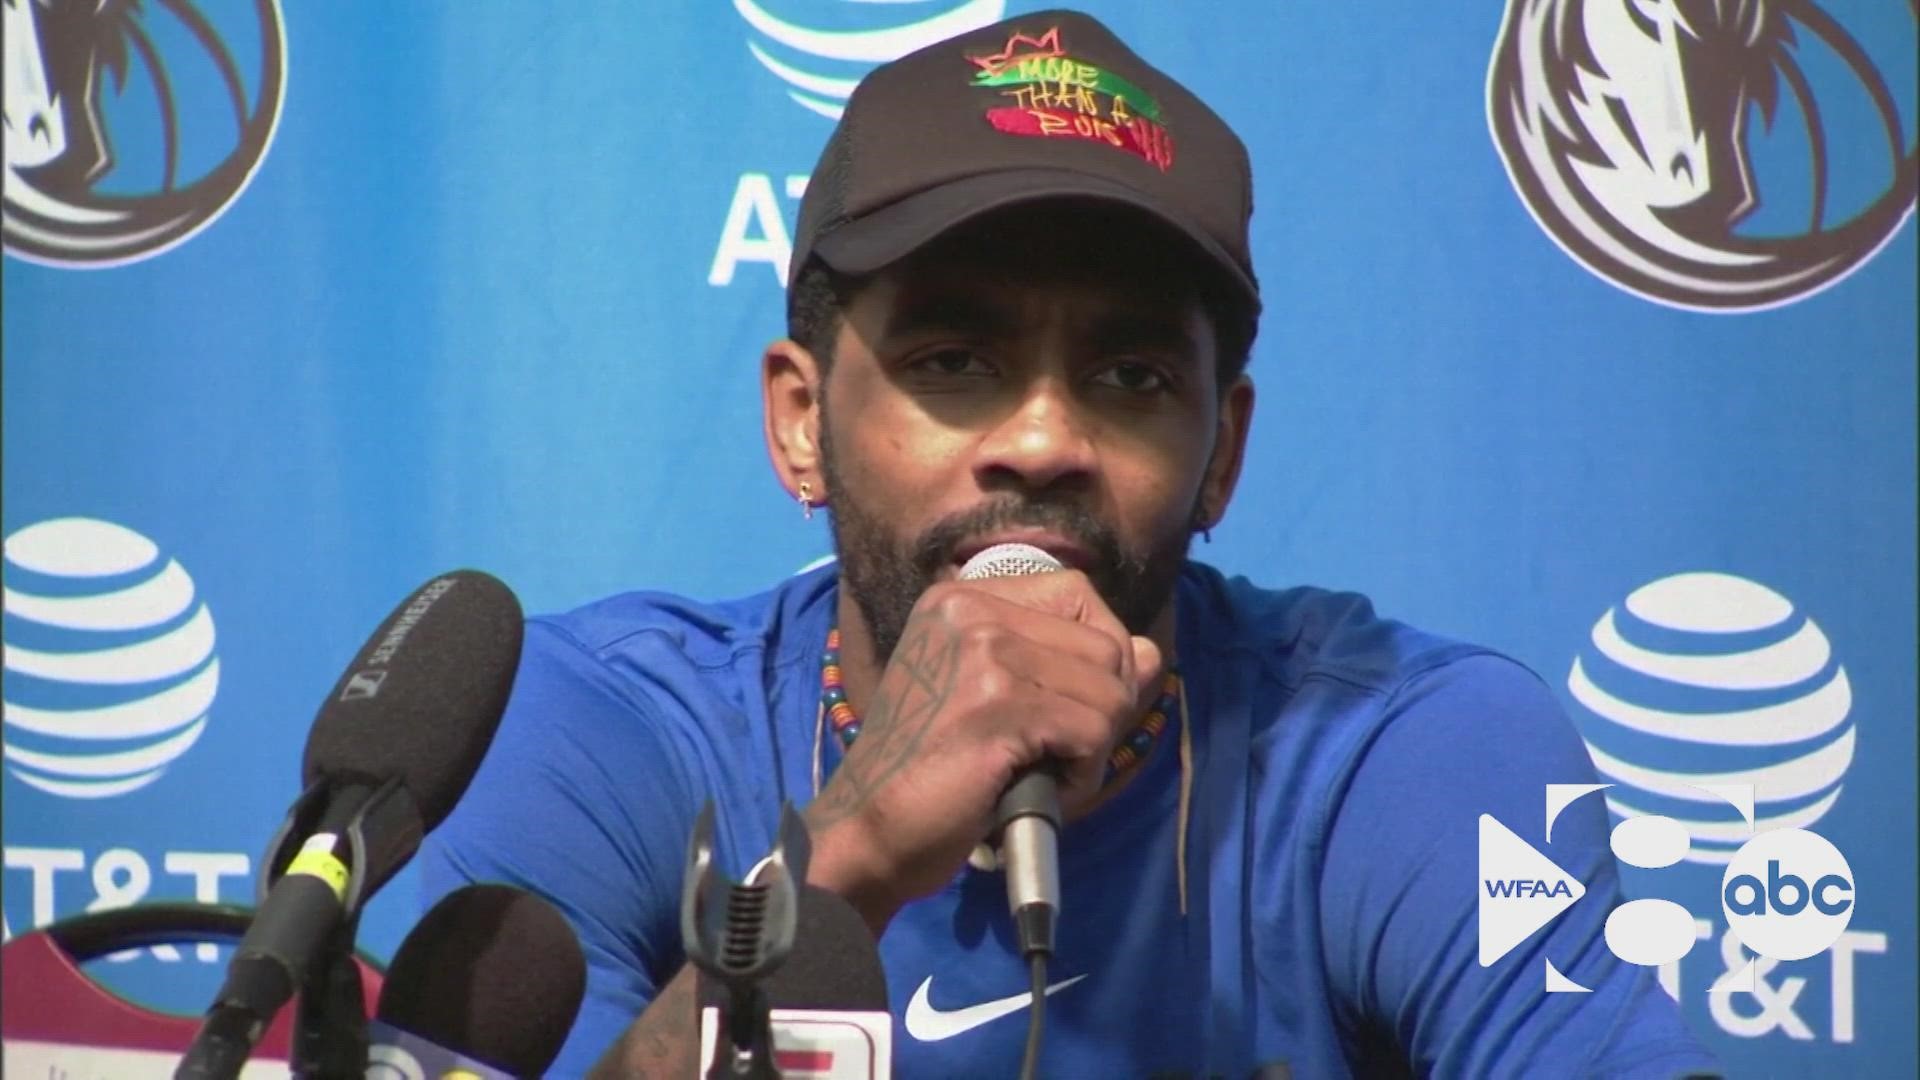 All-Star guard Kyrie Irving spoke to the media Tuesday for the first time since the Brooklyn Nets traded him to the Dallas Mavericks.